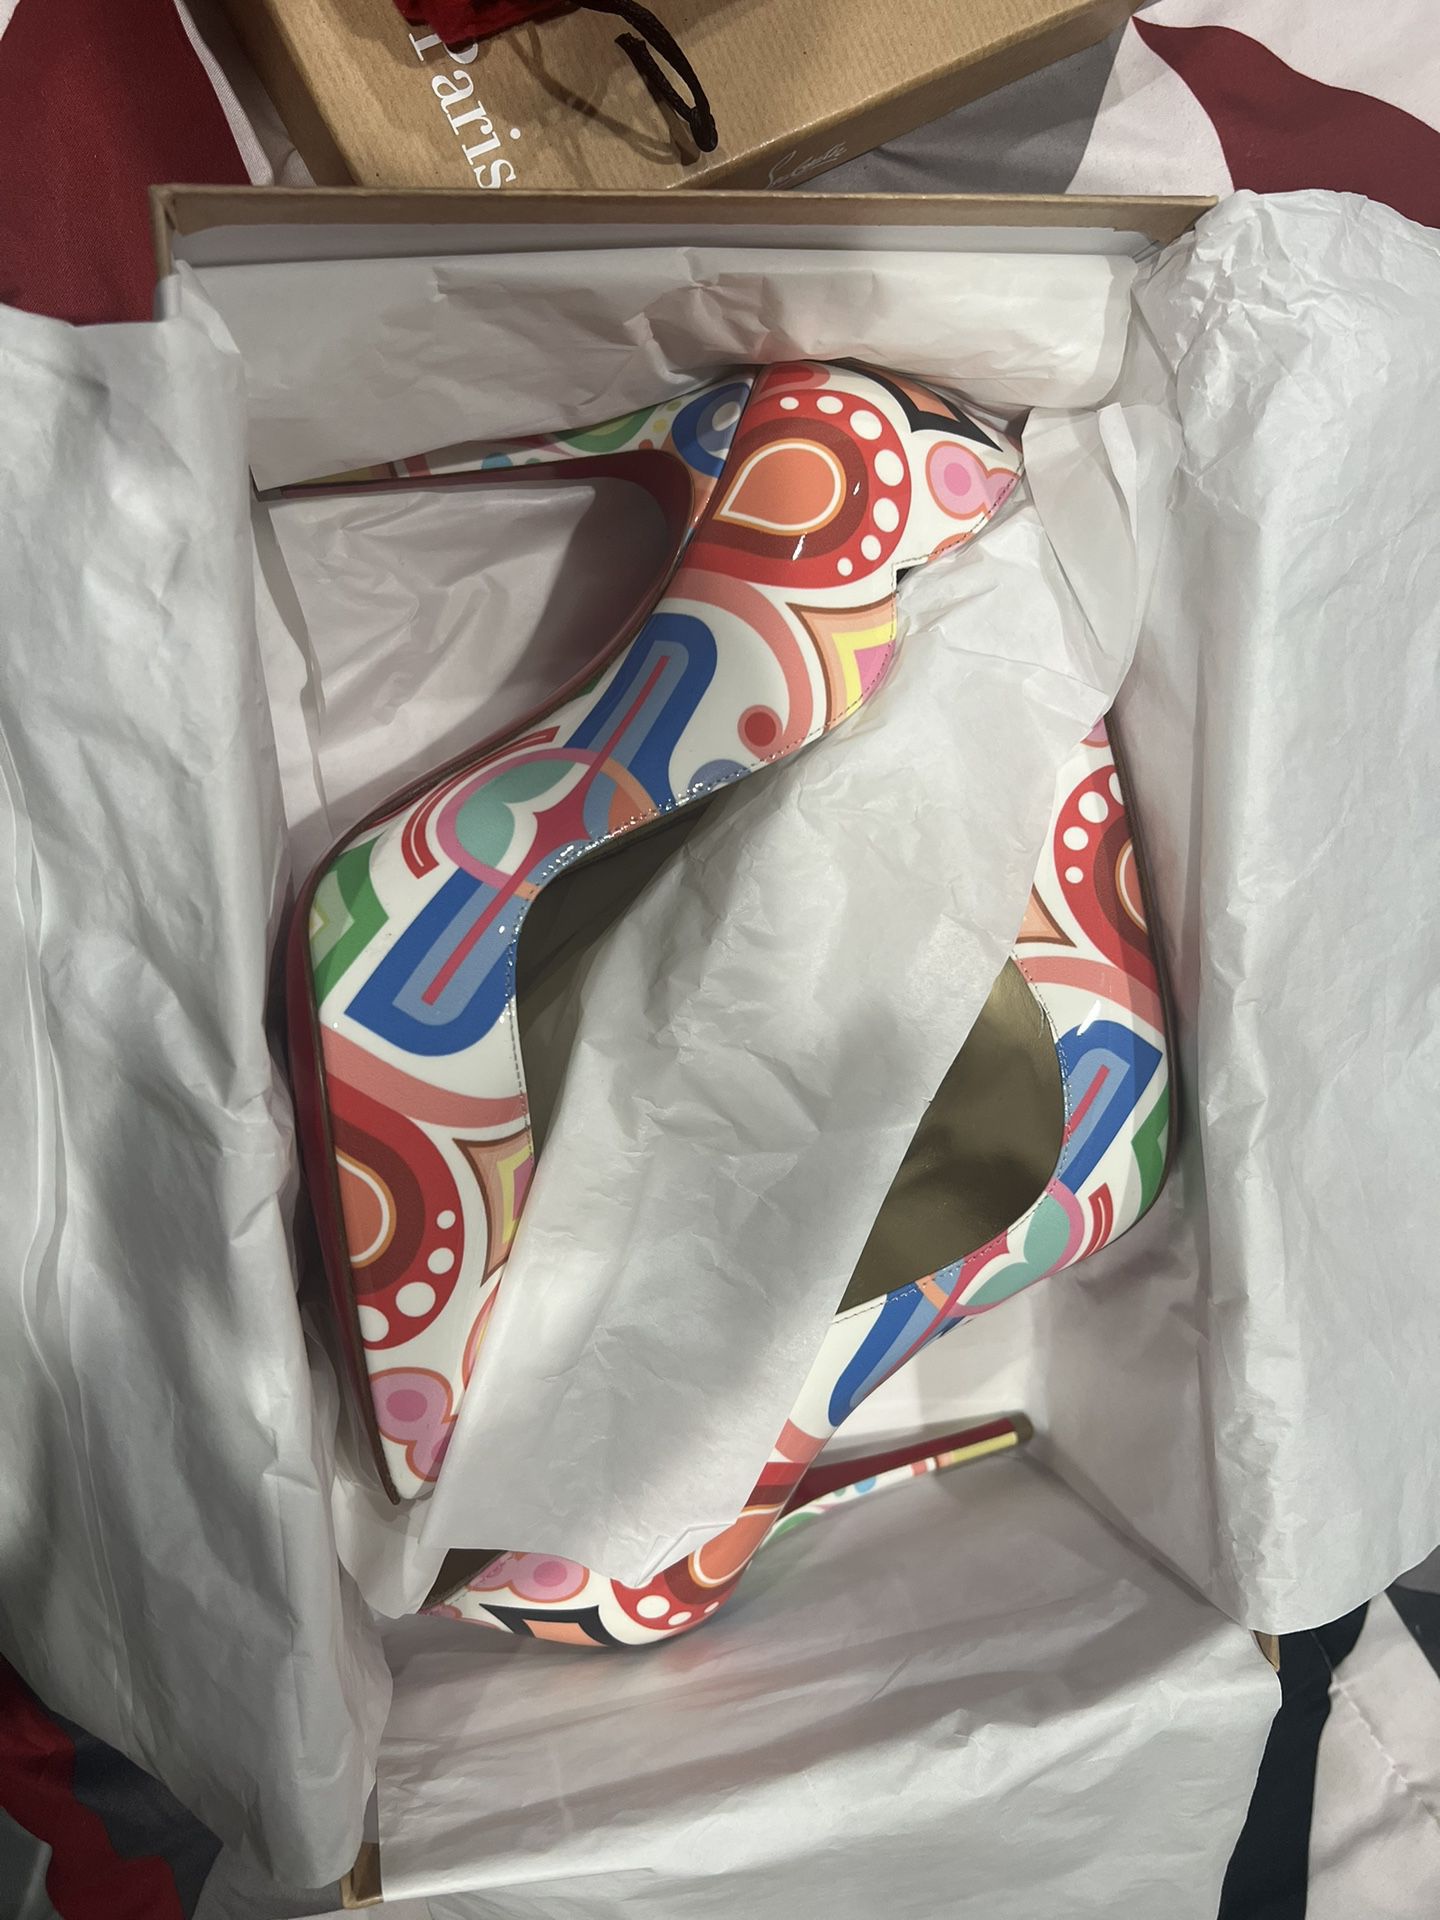 Christian Louboutin, Pumps, Multi Color, 3.9inches